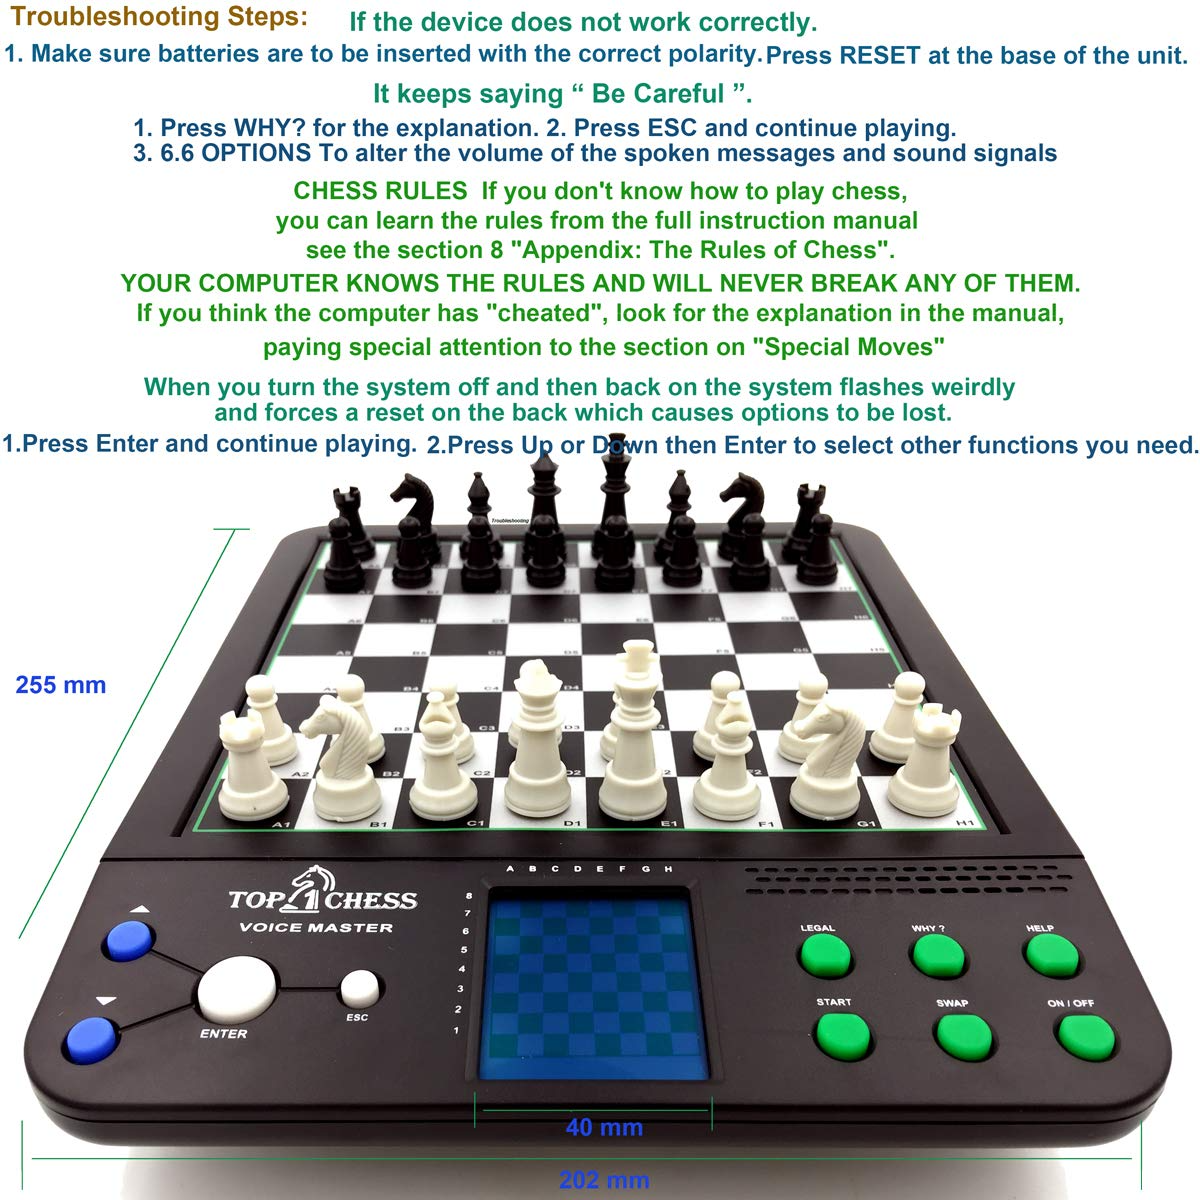 Top 1 Chess Set Board Game, Electronic Voice Chess Academy Classical 8 in 1 Computer Voice Teaching System